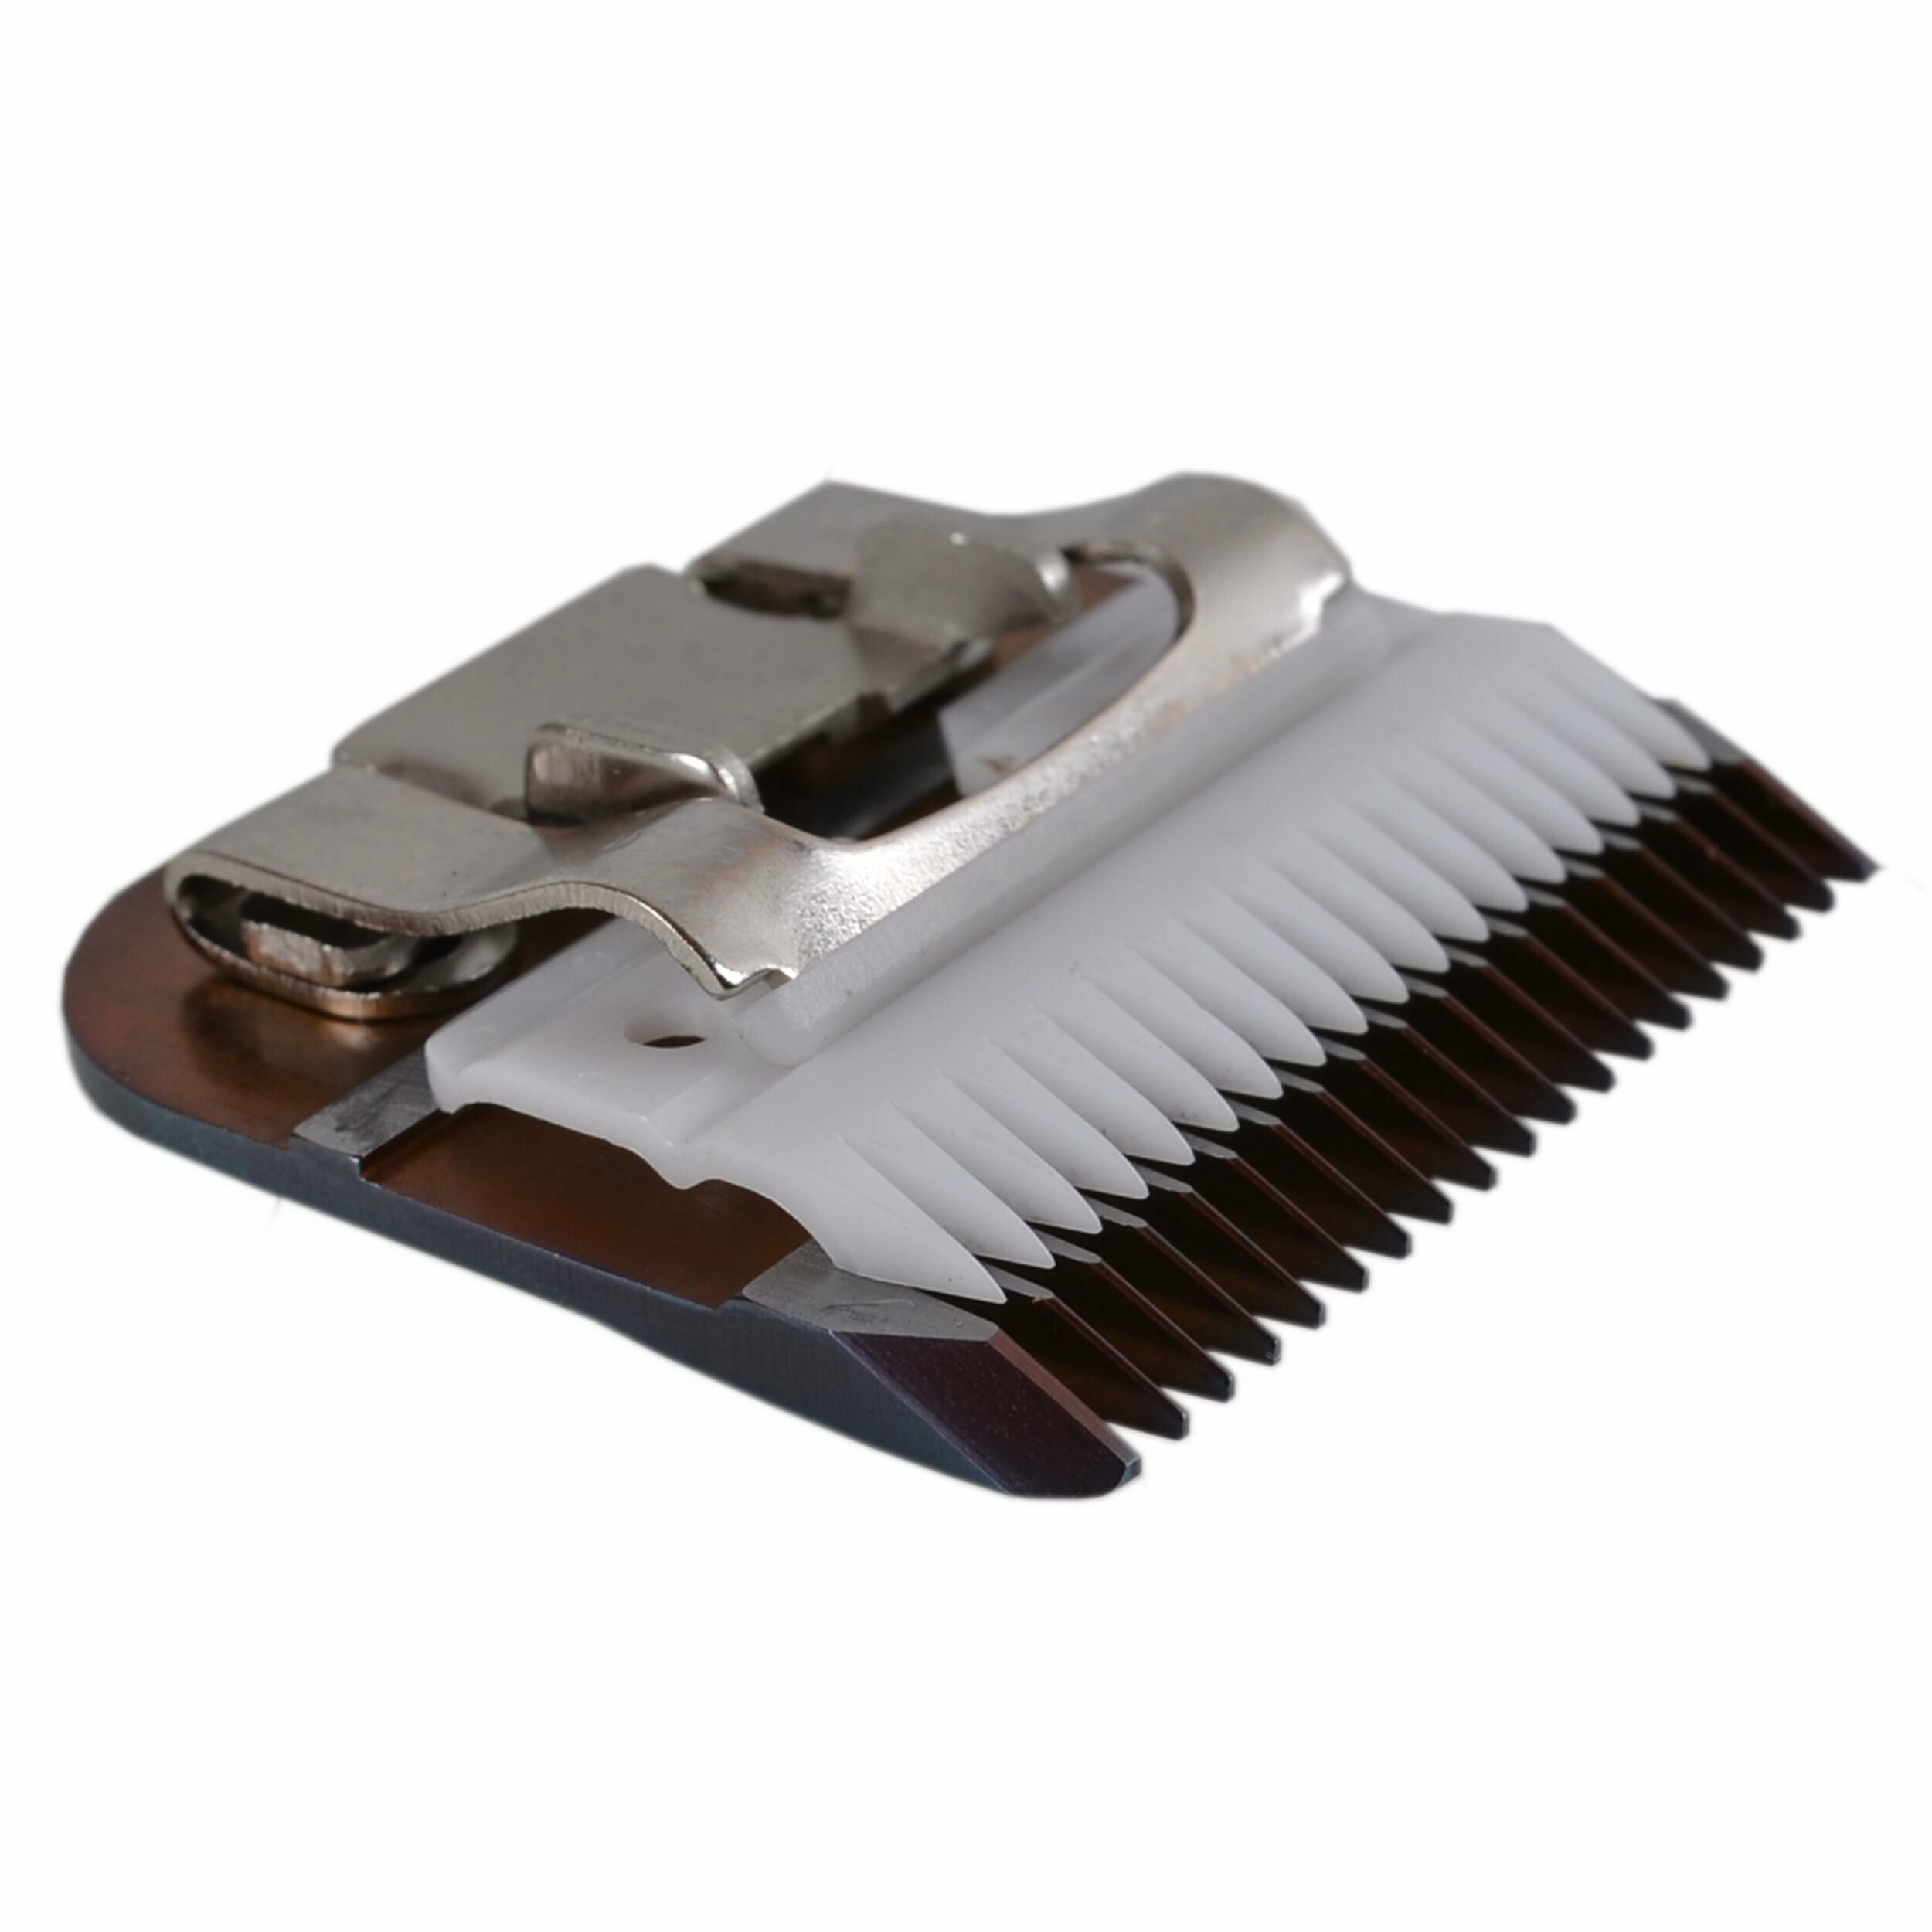 Blade 7F - 3 mm for Oster, Andis, Wahl Moser, Heiniger, Optimum and many other pet clippers